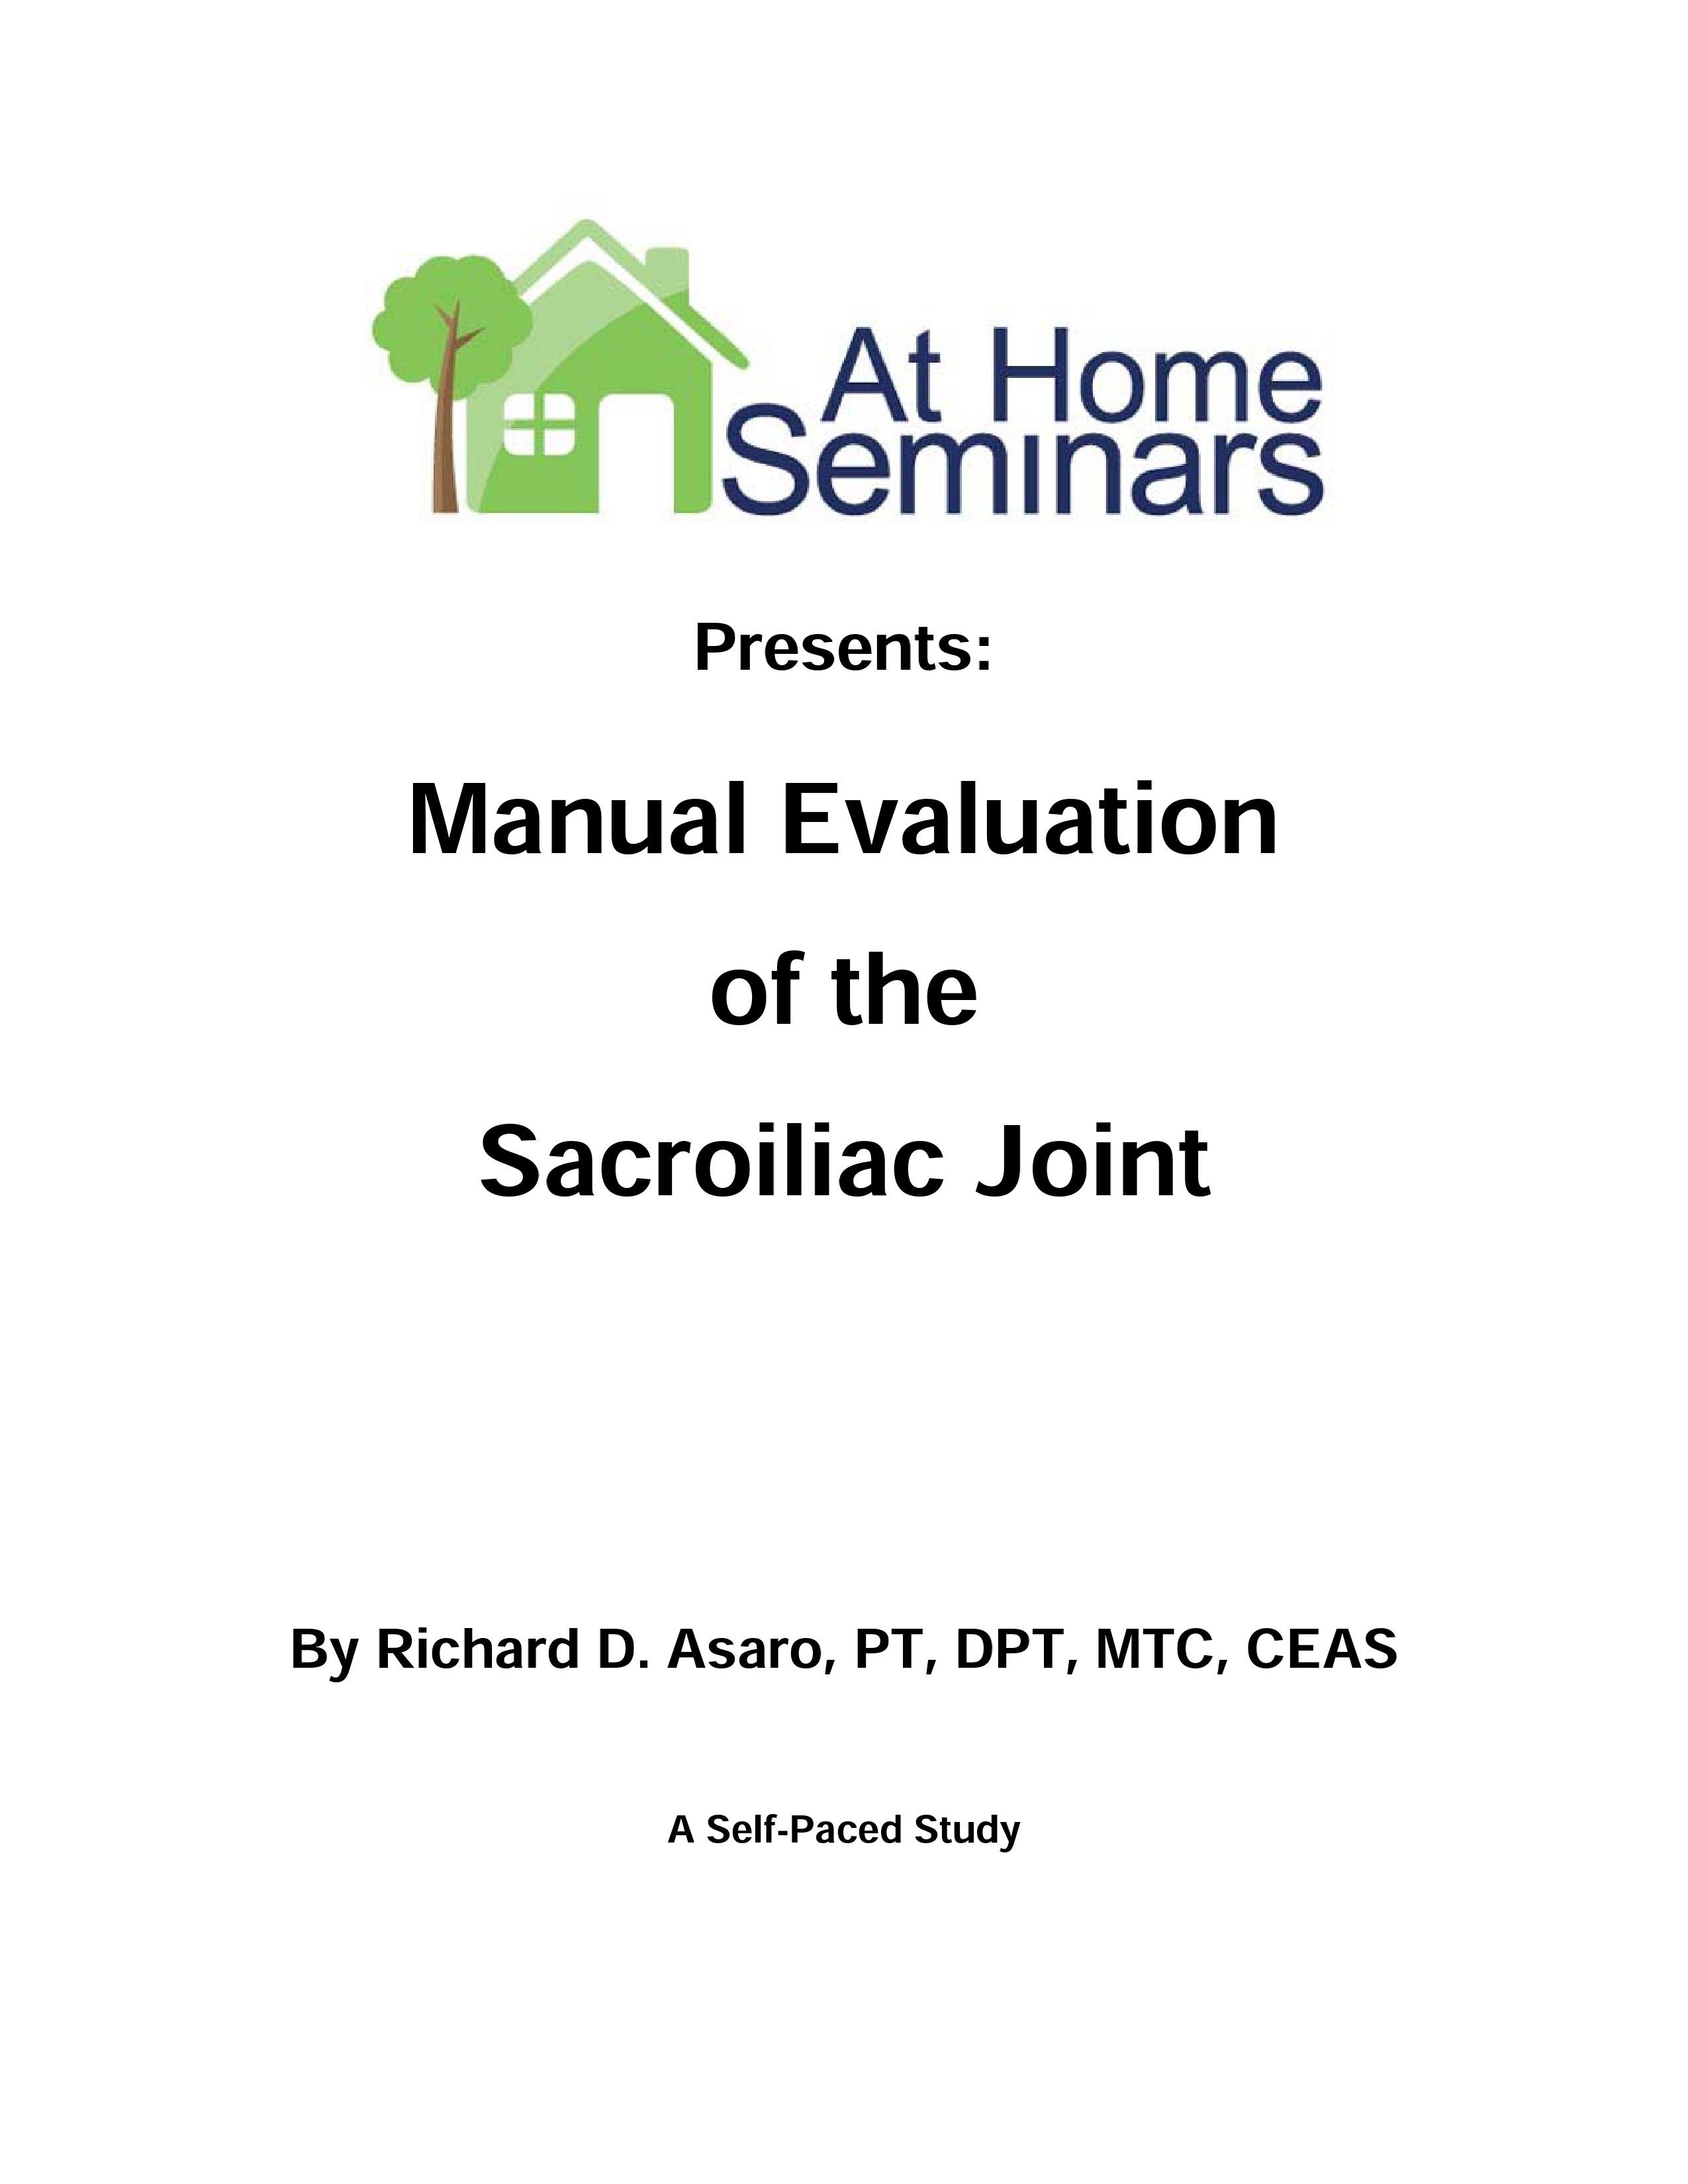 Manual Evaluation of the Sacroiliac Joint (Electronic Download)